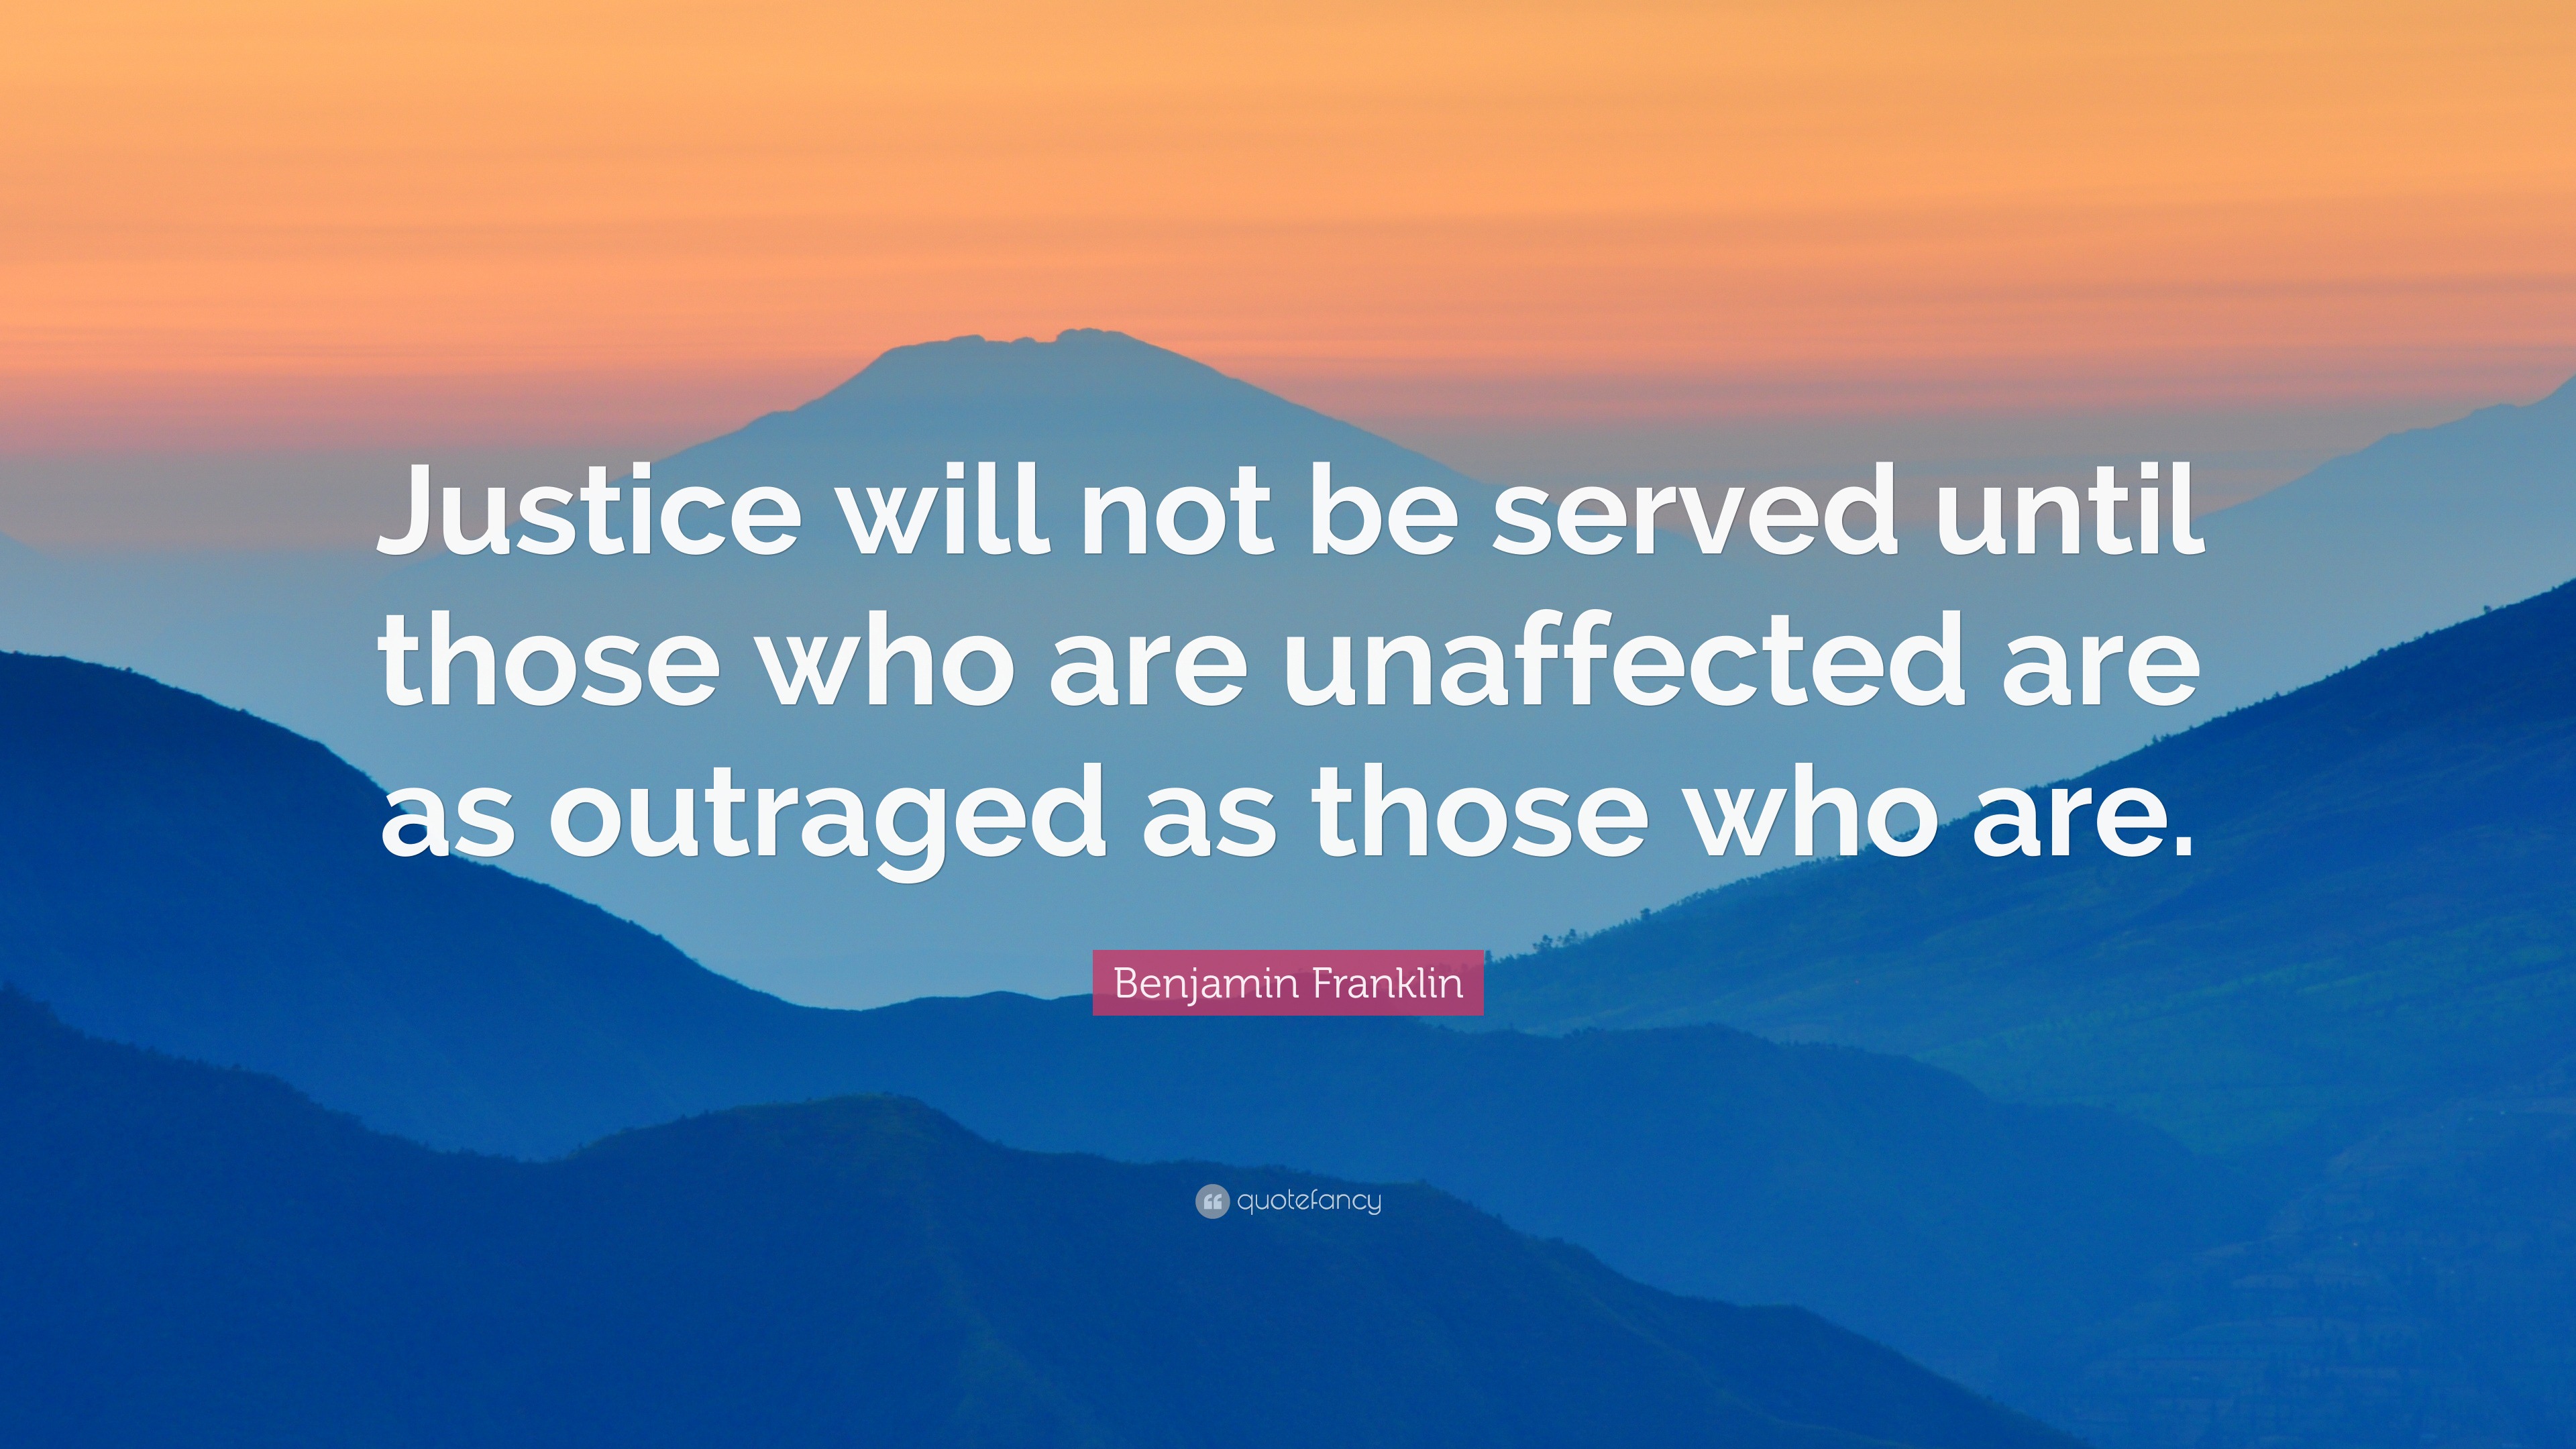 Benjamin Franklin Quote “Justice will not be served until